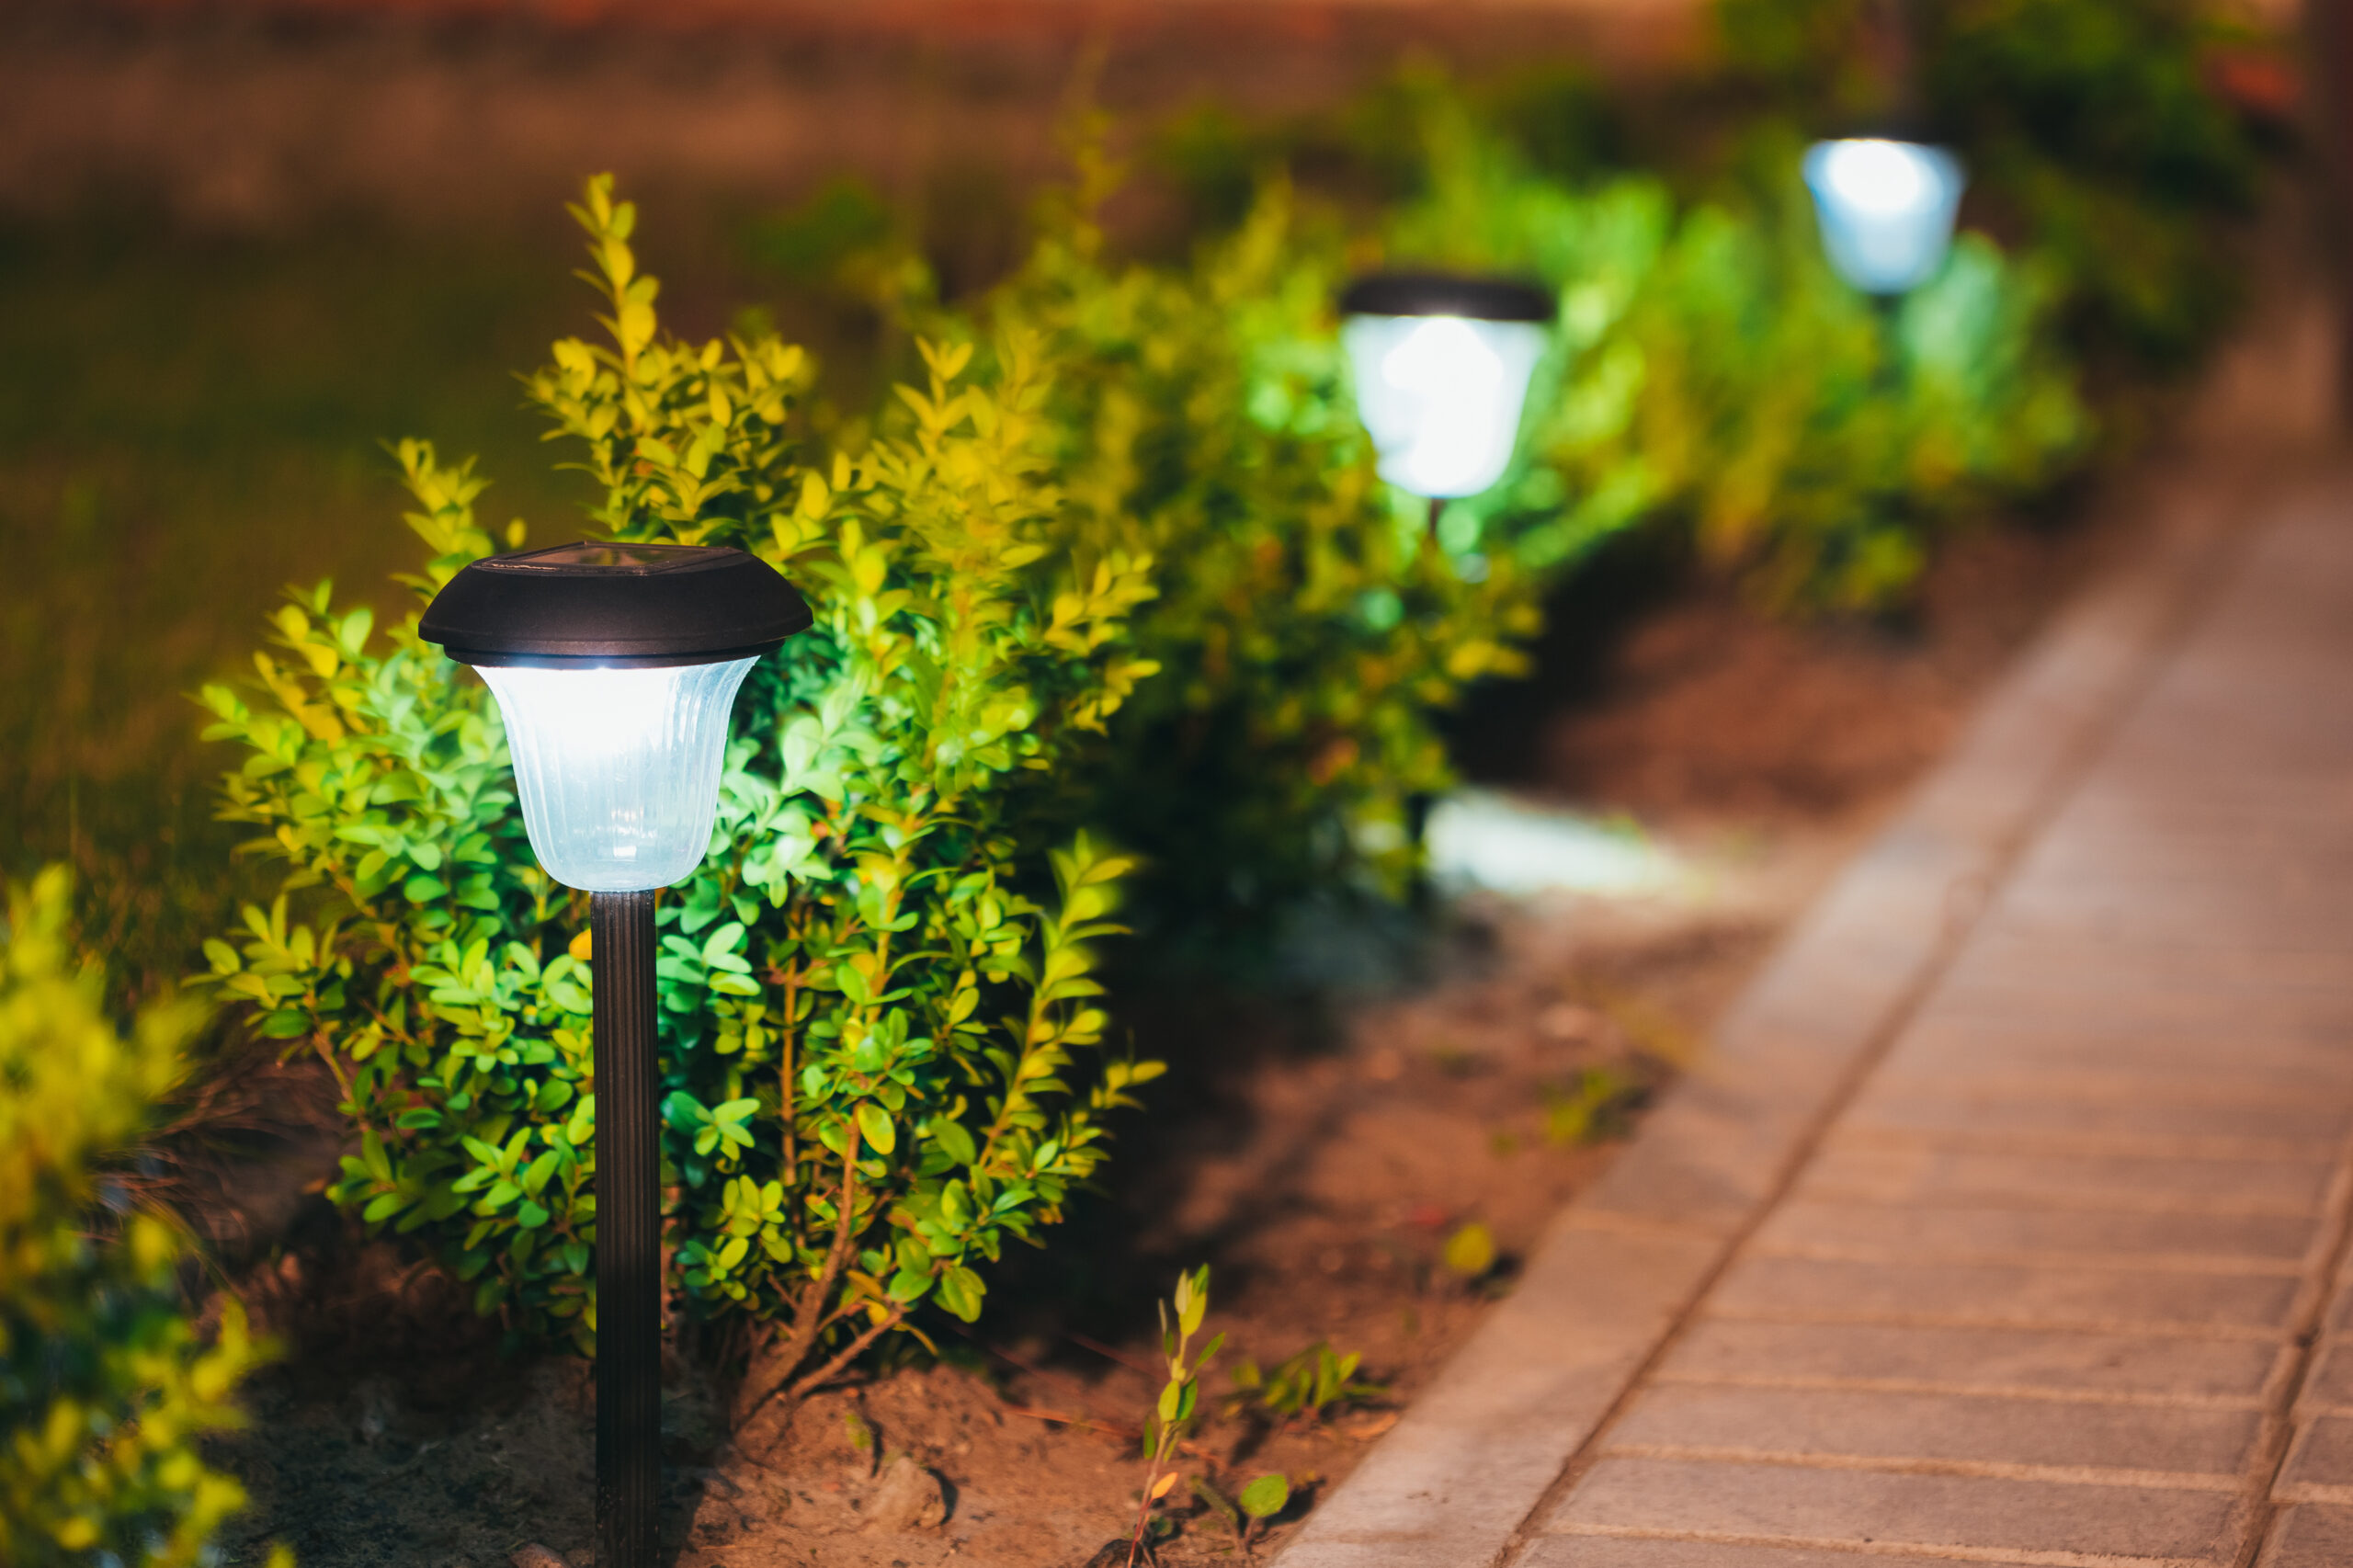 Should you install solar landscape lighting in Lupus, MO